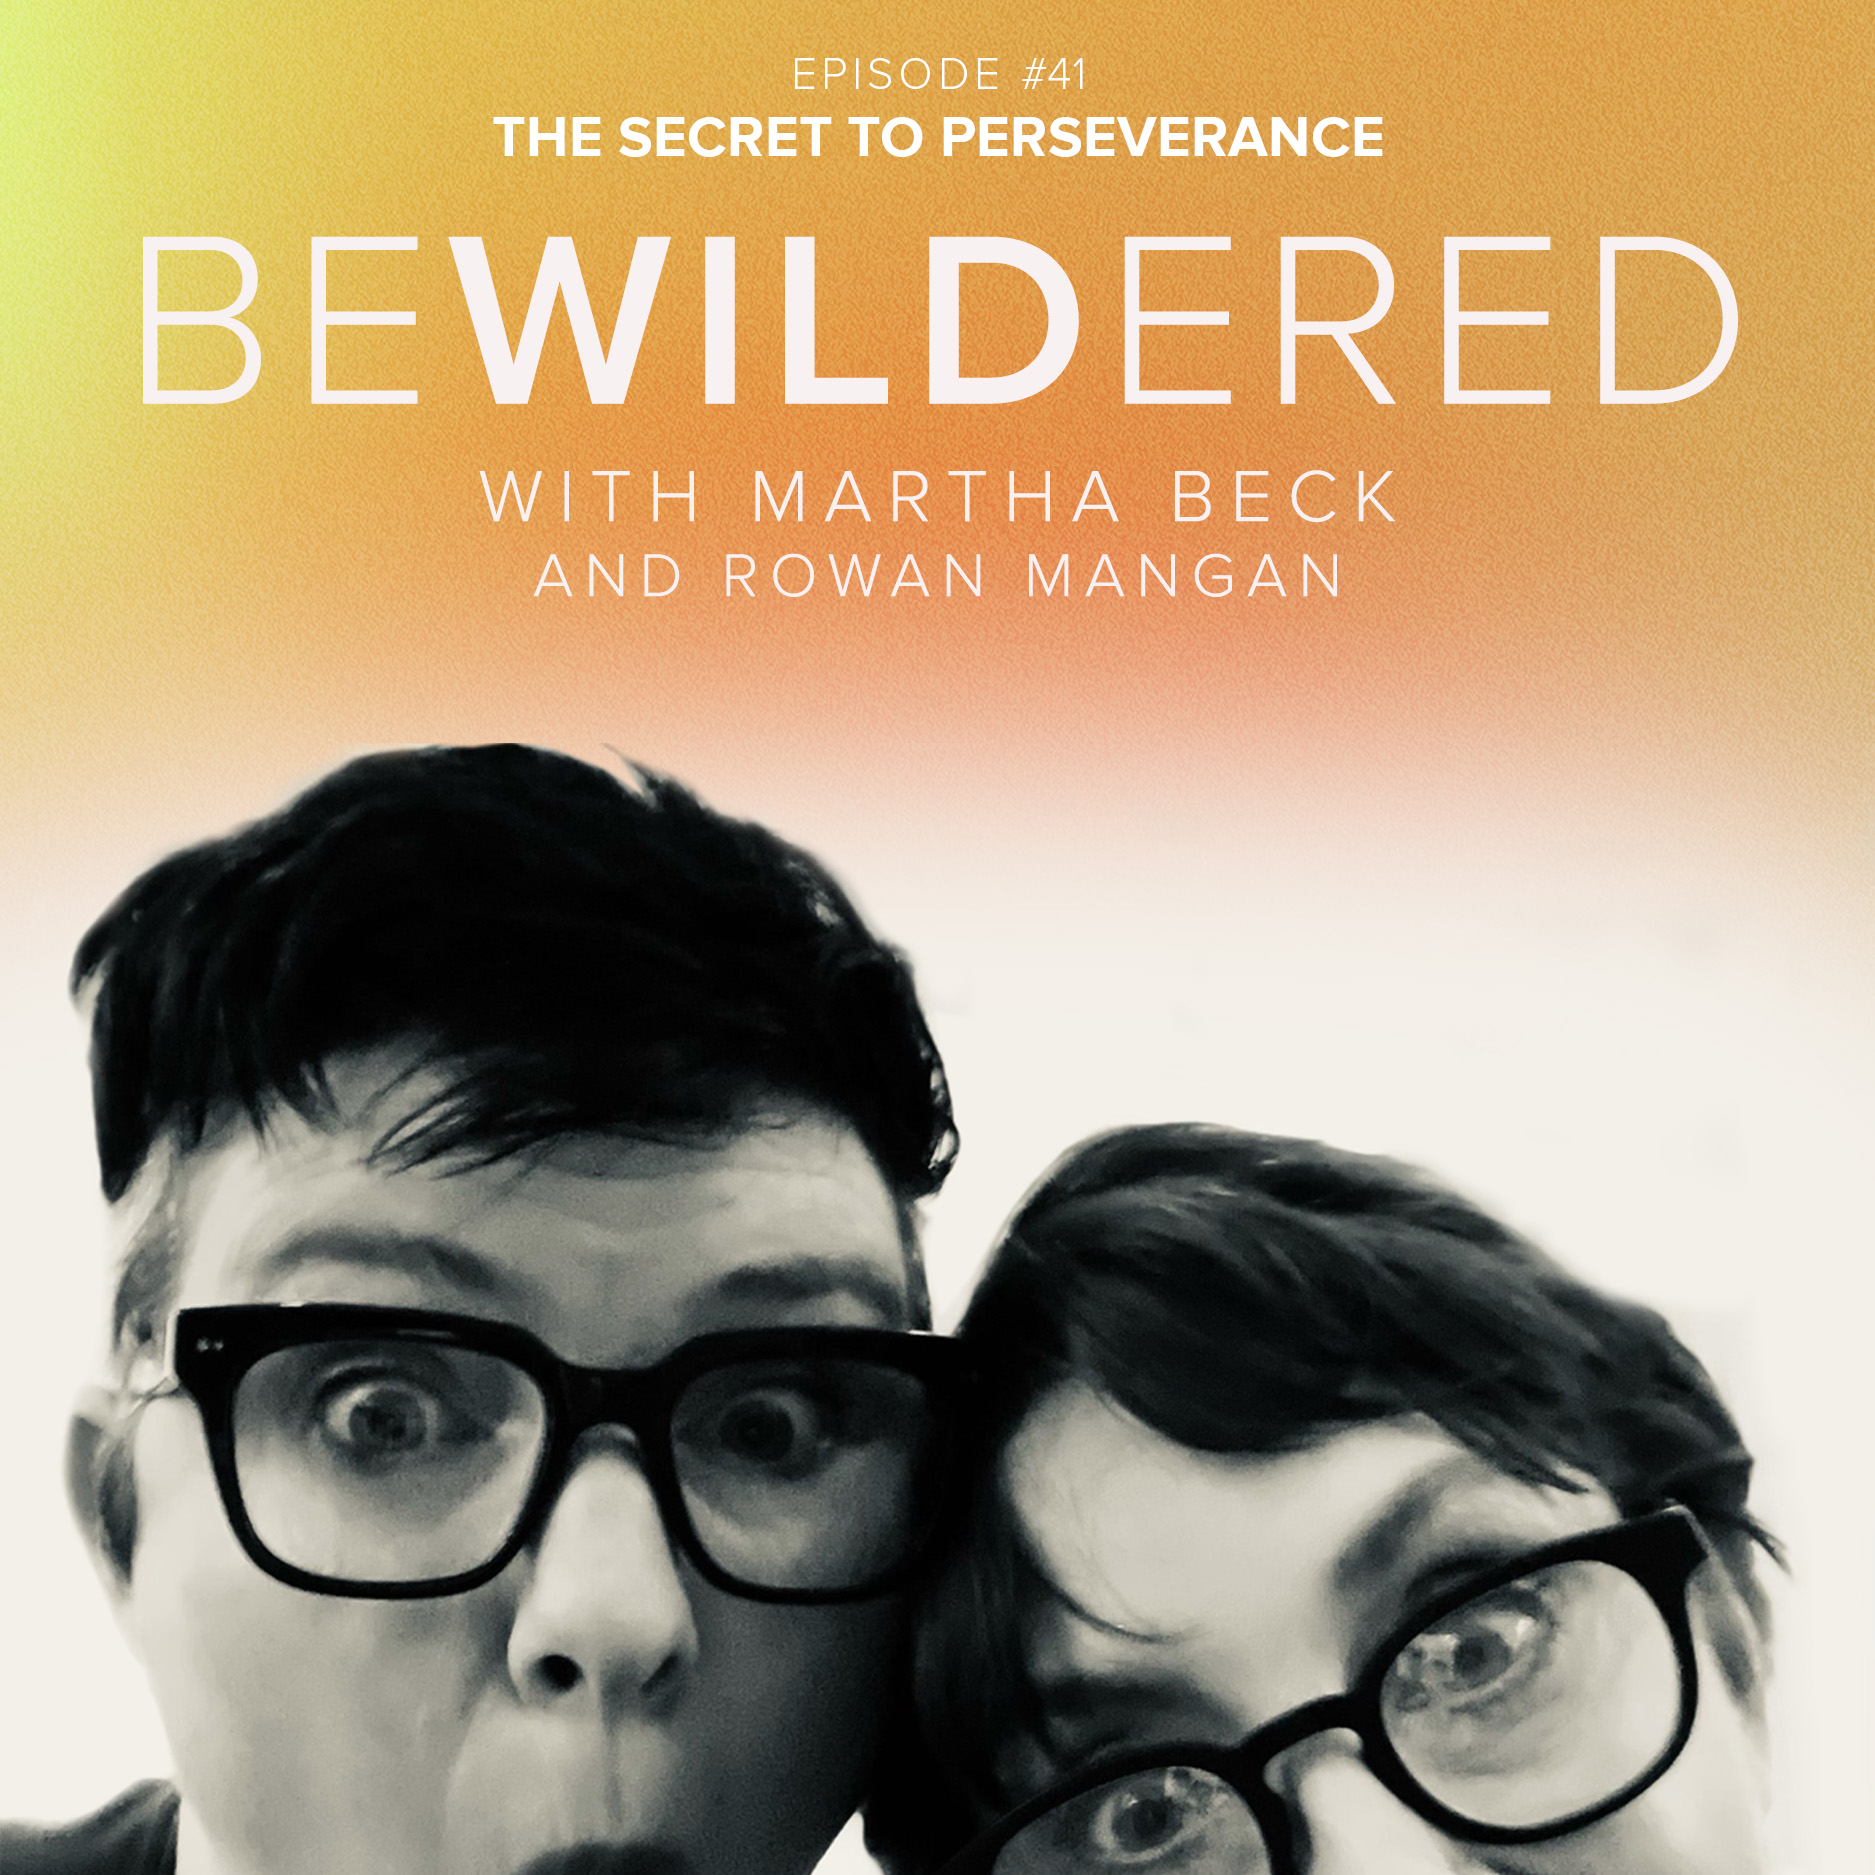 Image for Episode #41 The Secret to Perseverance for the Bewildered Podcast with Martha Beck and Rowan Mangan